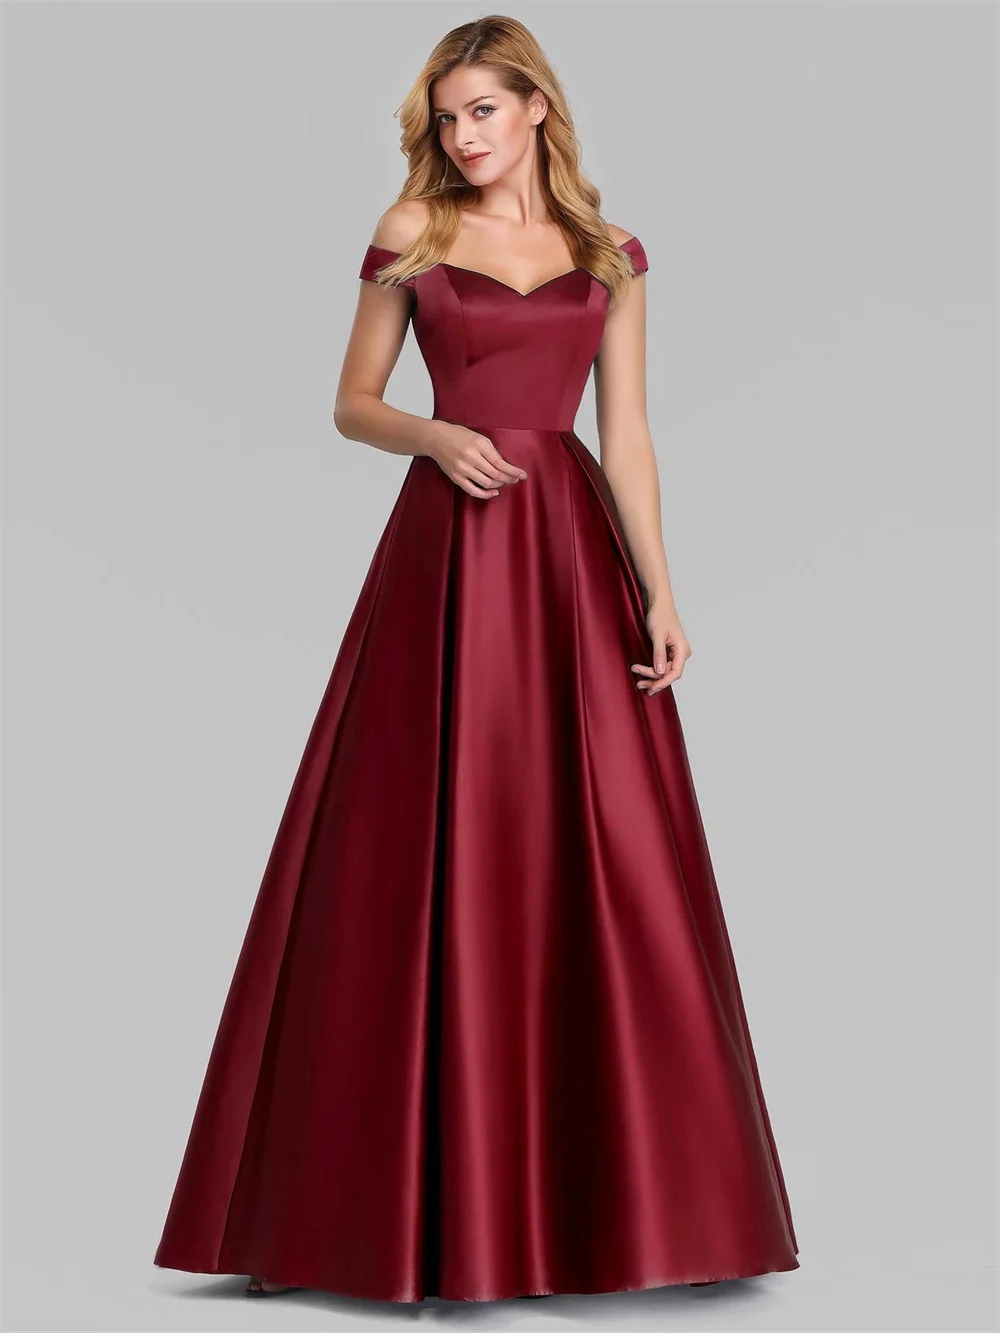 Elegant Women Evening Party Dress 2023 New in Sexy V-neck High Waist Maxi Gowns Ladies Boutique Prom Quinceanera Dresses sevintage red sexy high slit long prom dresses v neck pleats sheer evening dress princess satin party gowns 2021 custom made